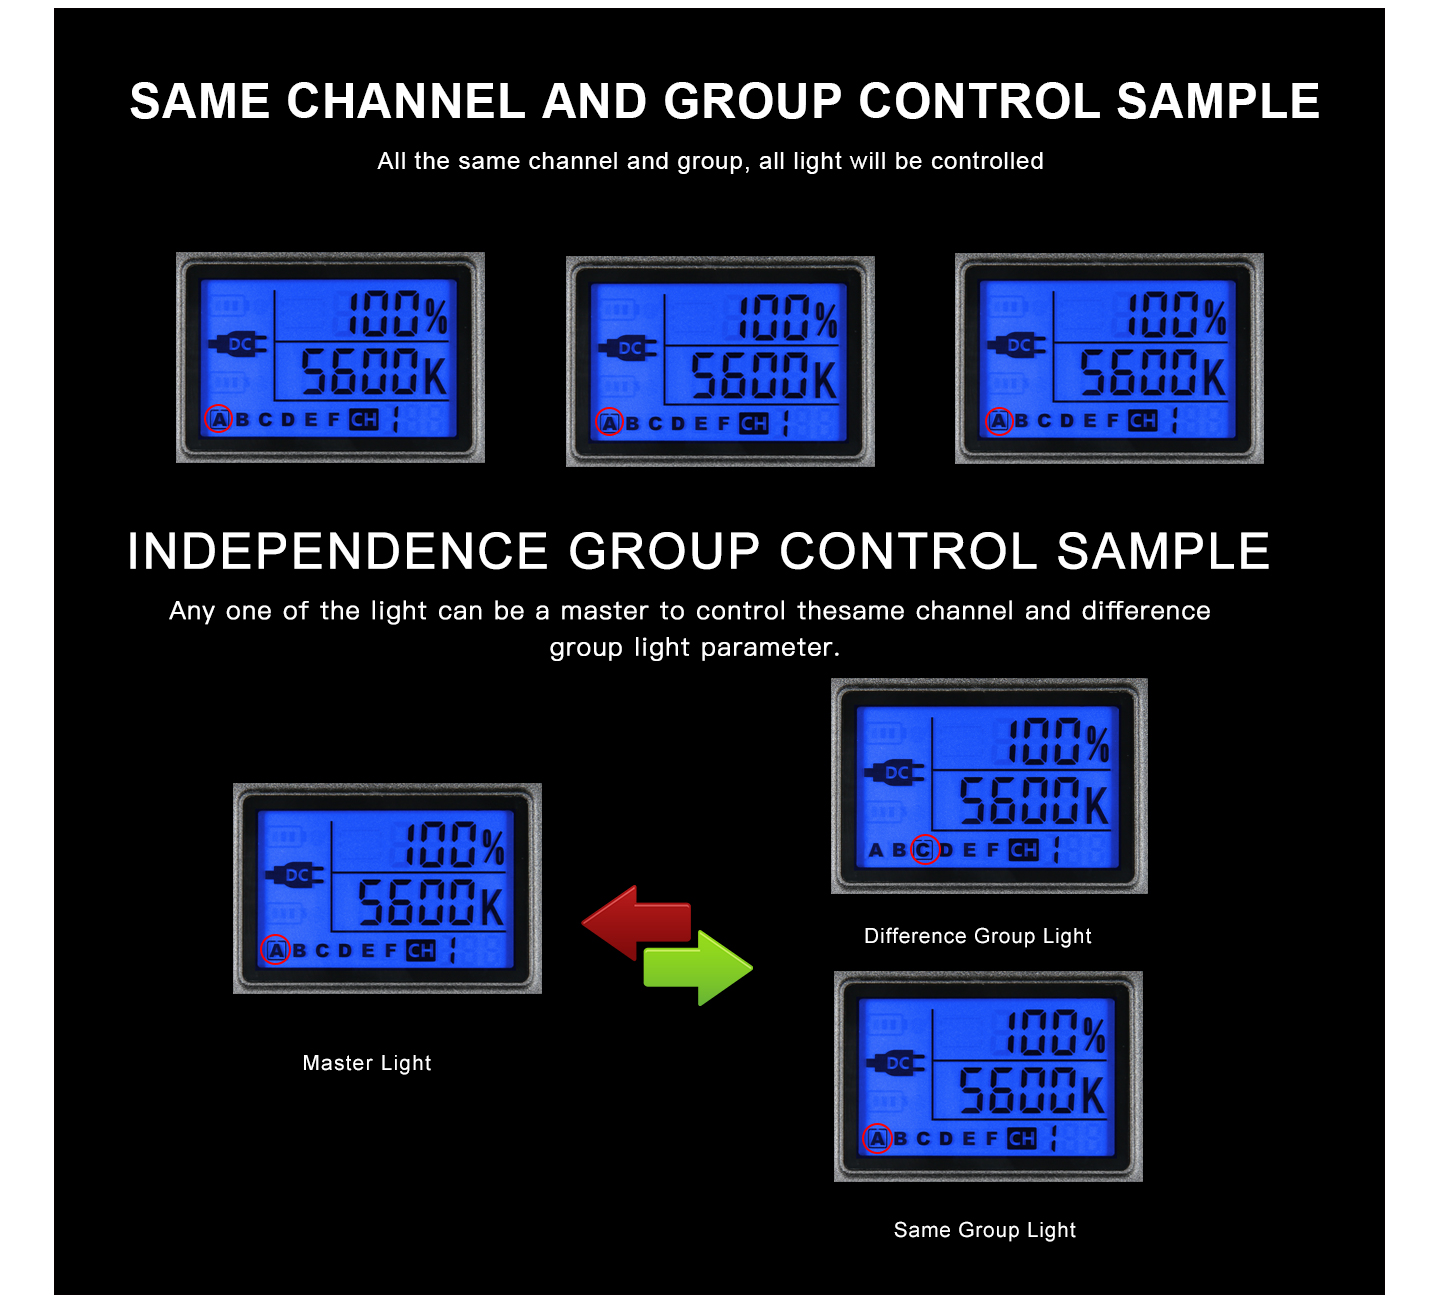 SAME CHANNEL AND GROUP CONTROL SAMPLE